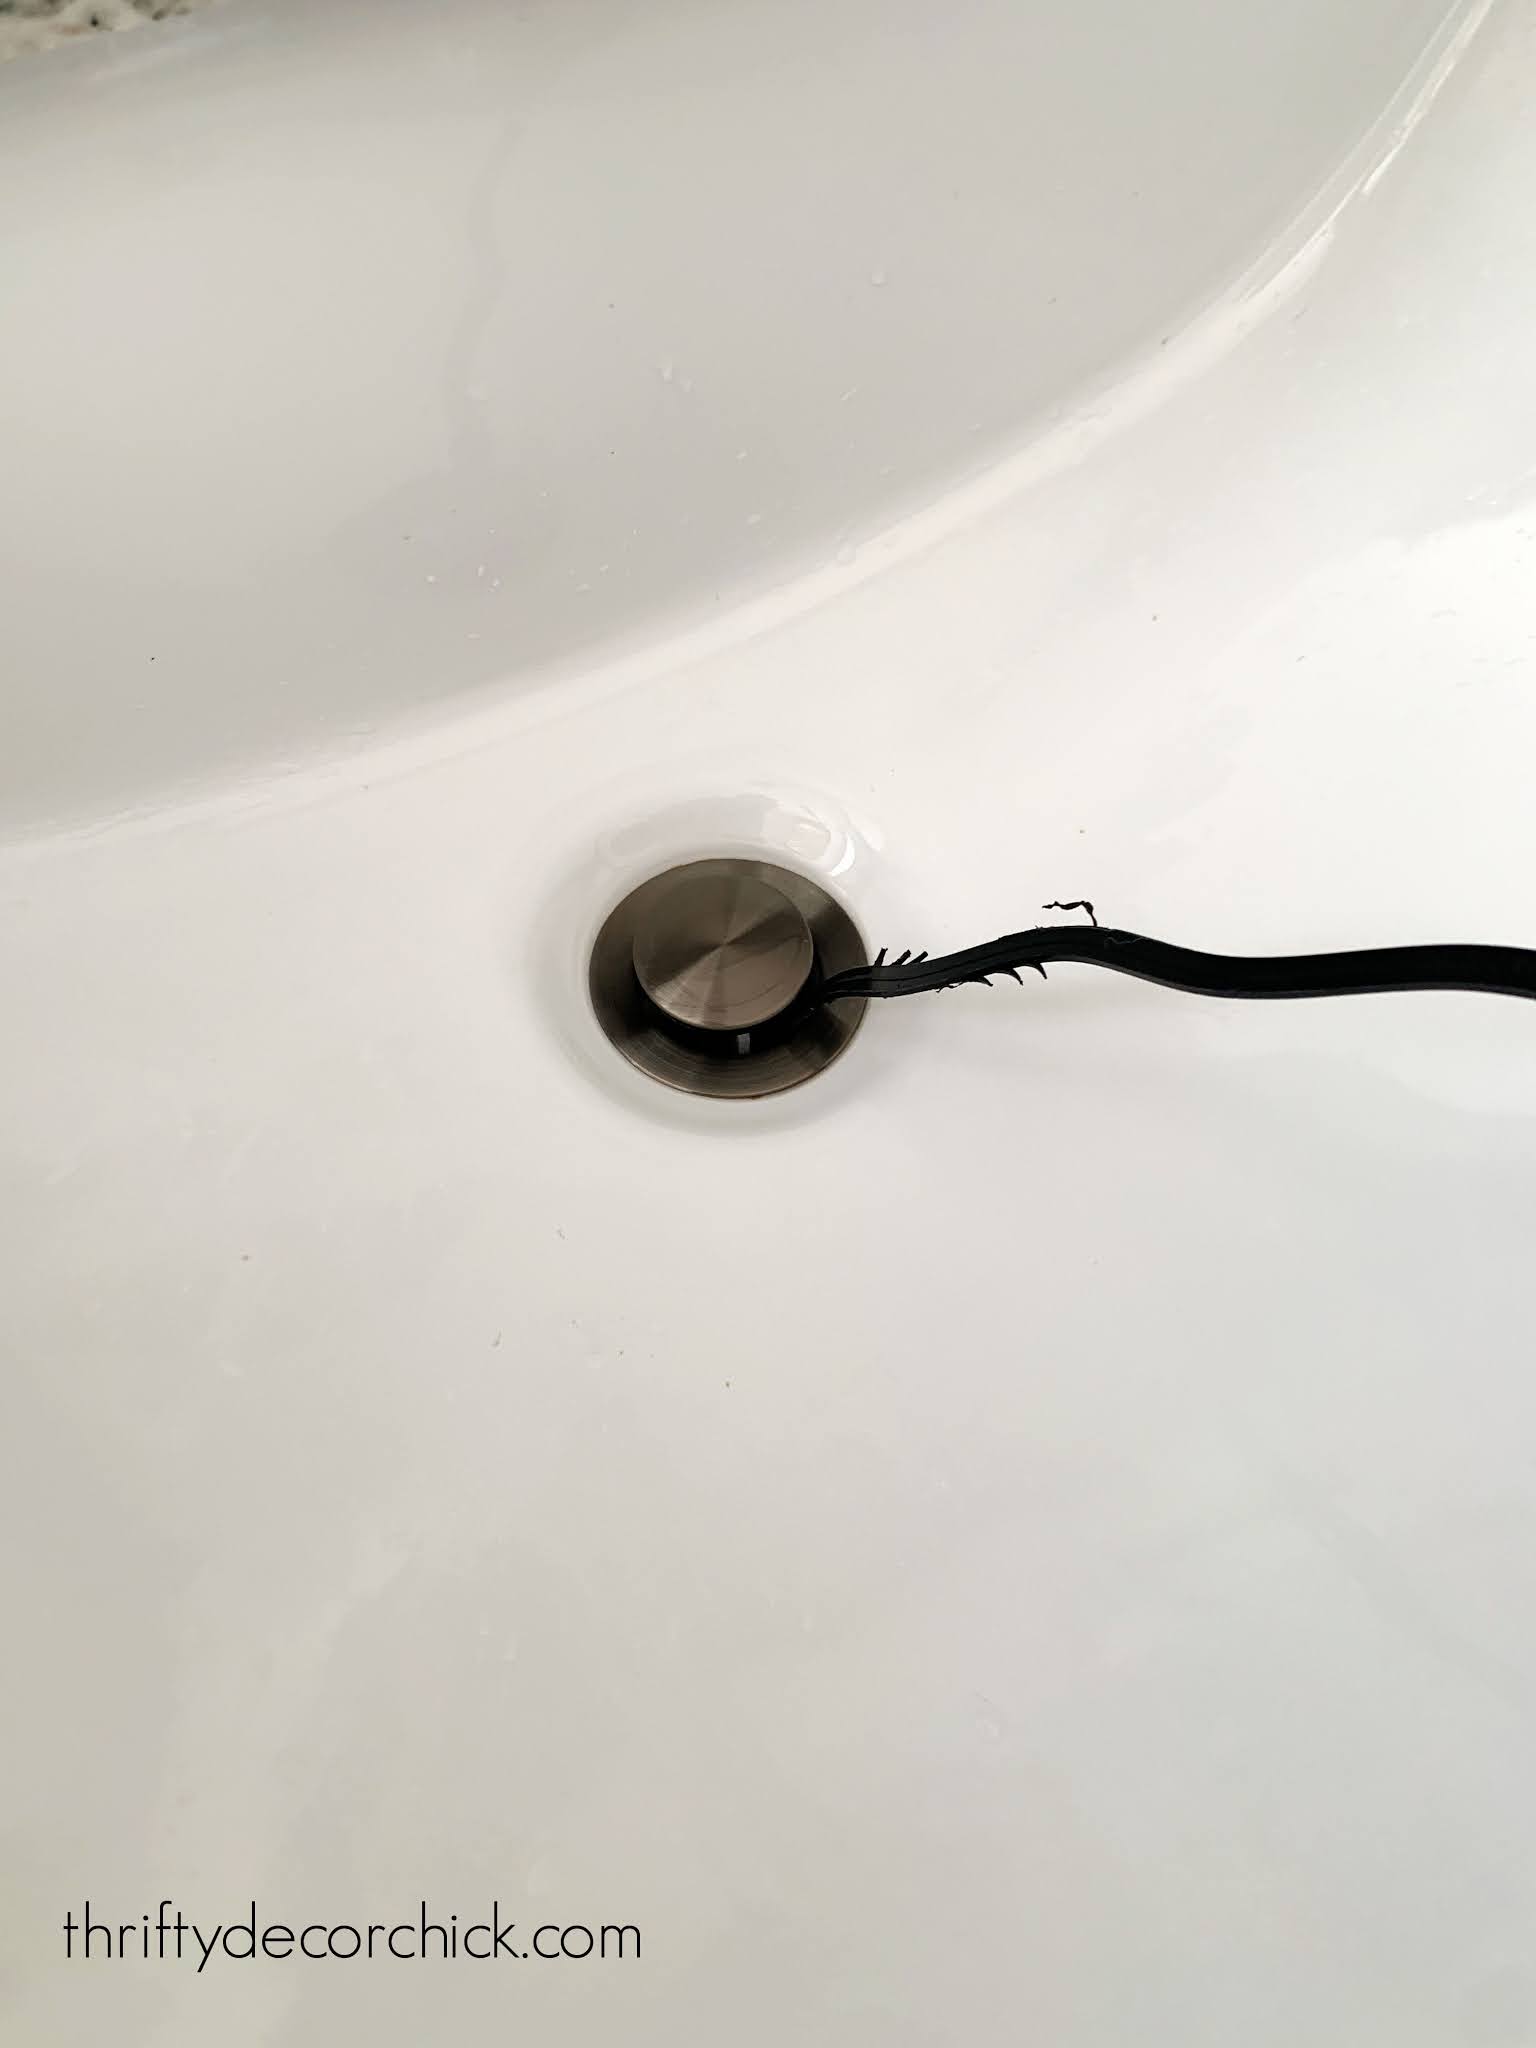 How to Clean Hair Out of a Drain